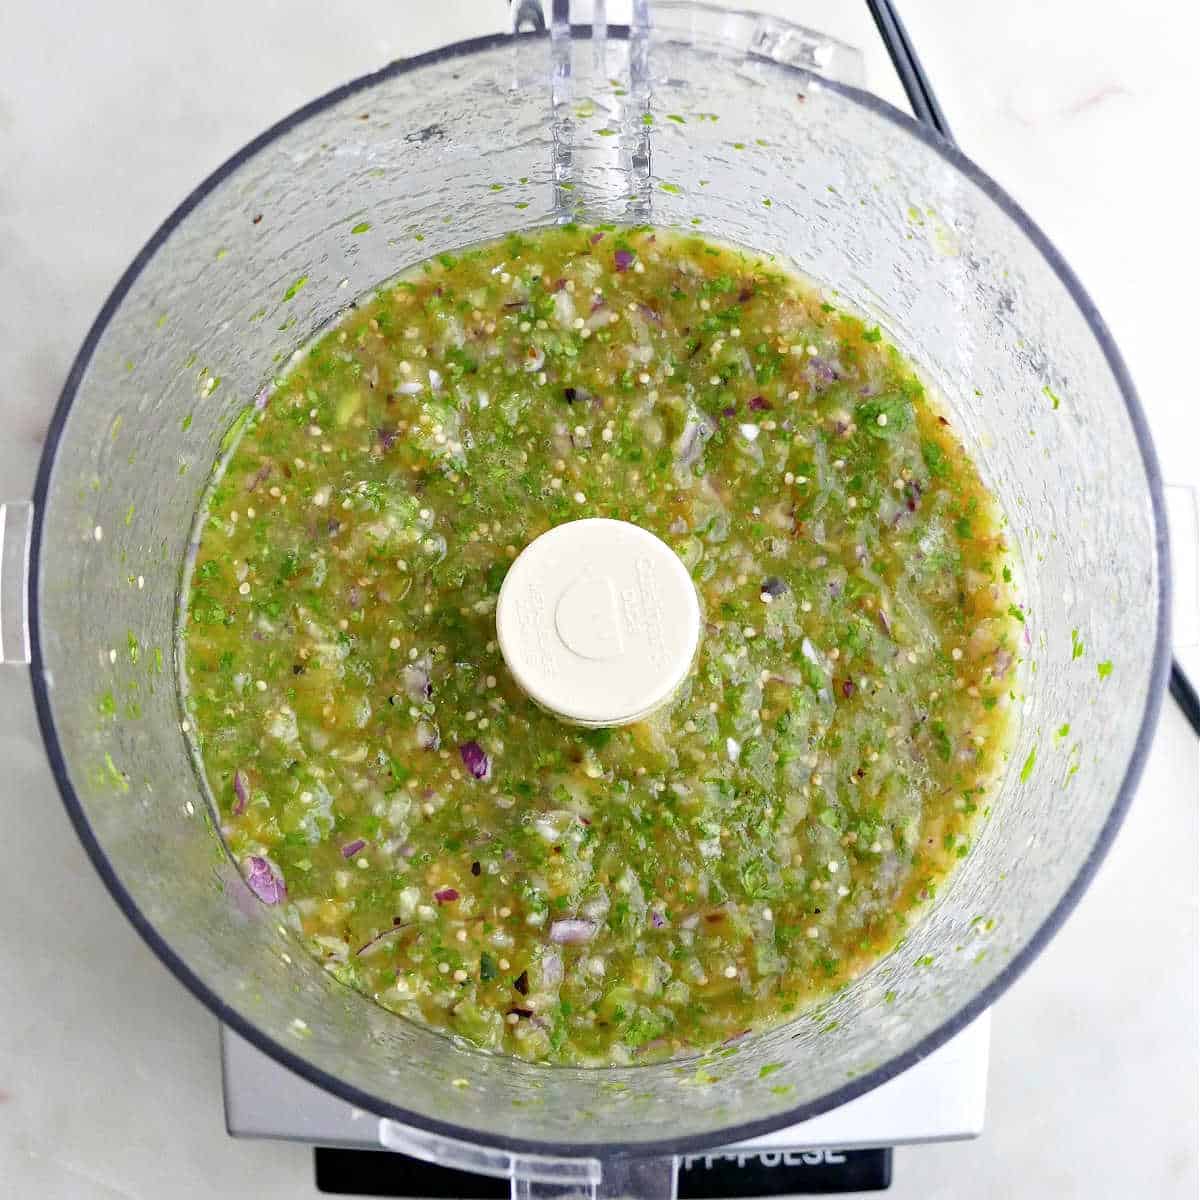 tomatillo green chili salsa mixed in a food processor on top of a counter